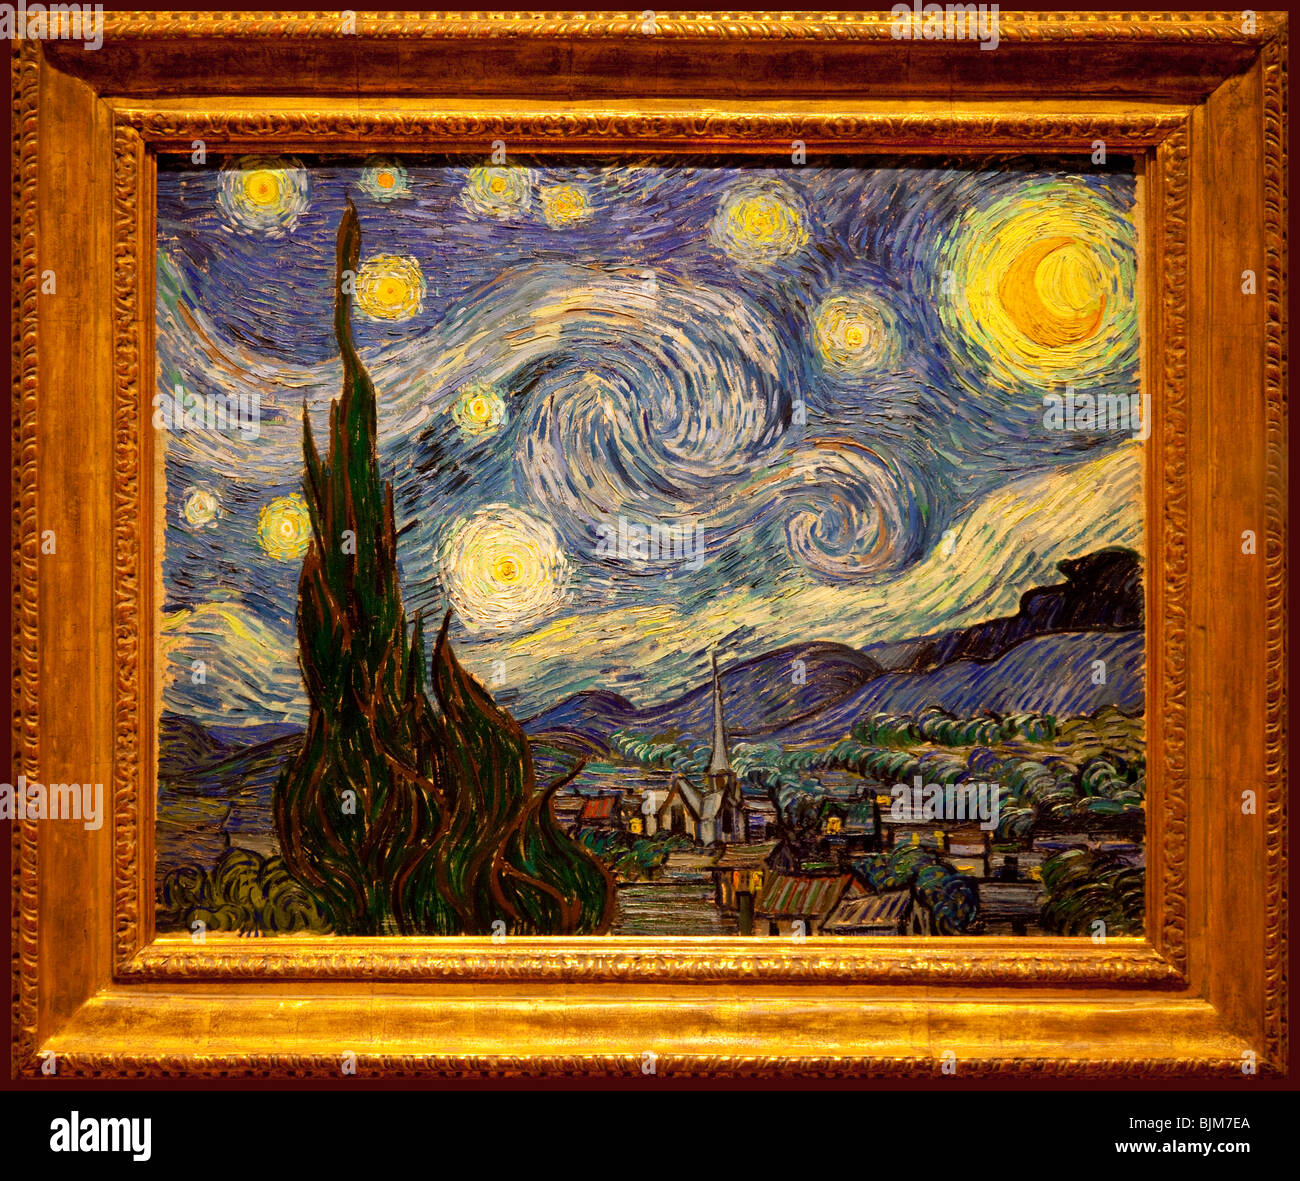 Van Goghs Starry Night On Display At The Museum Of Modern Art New